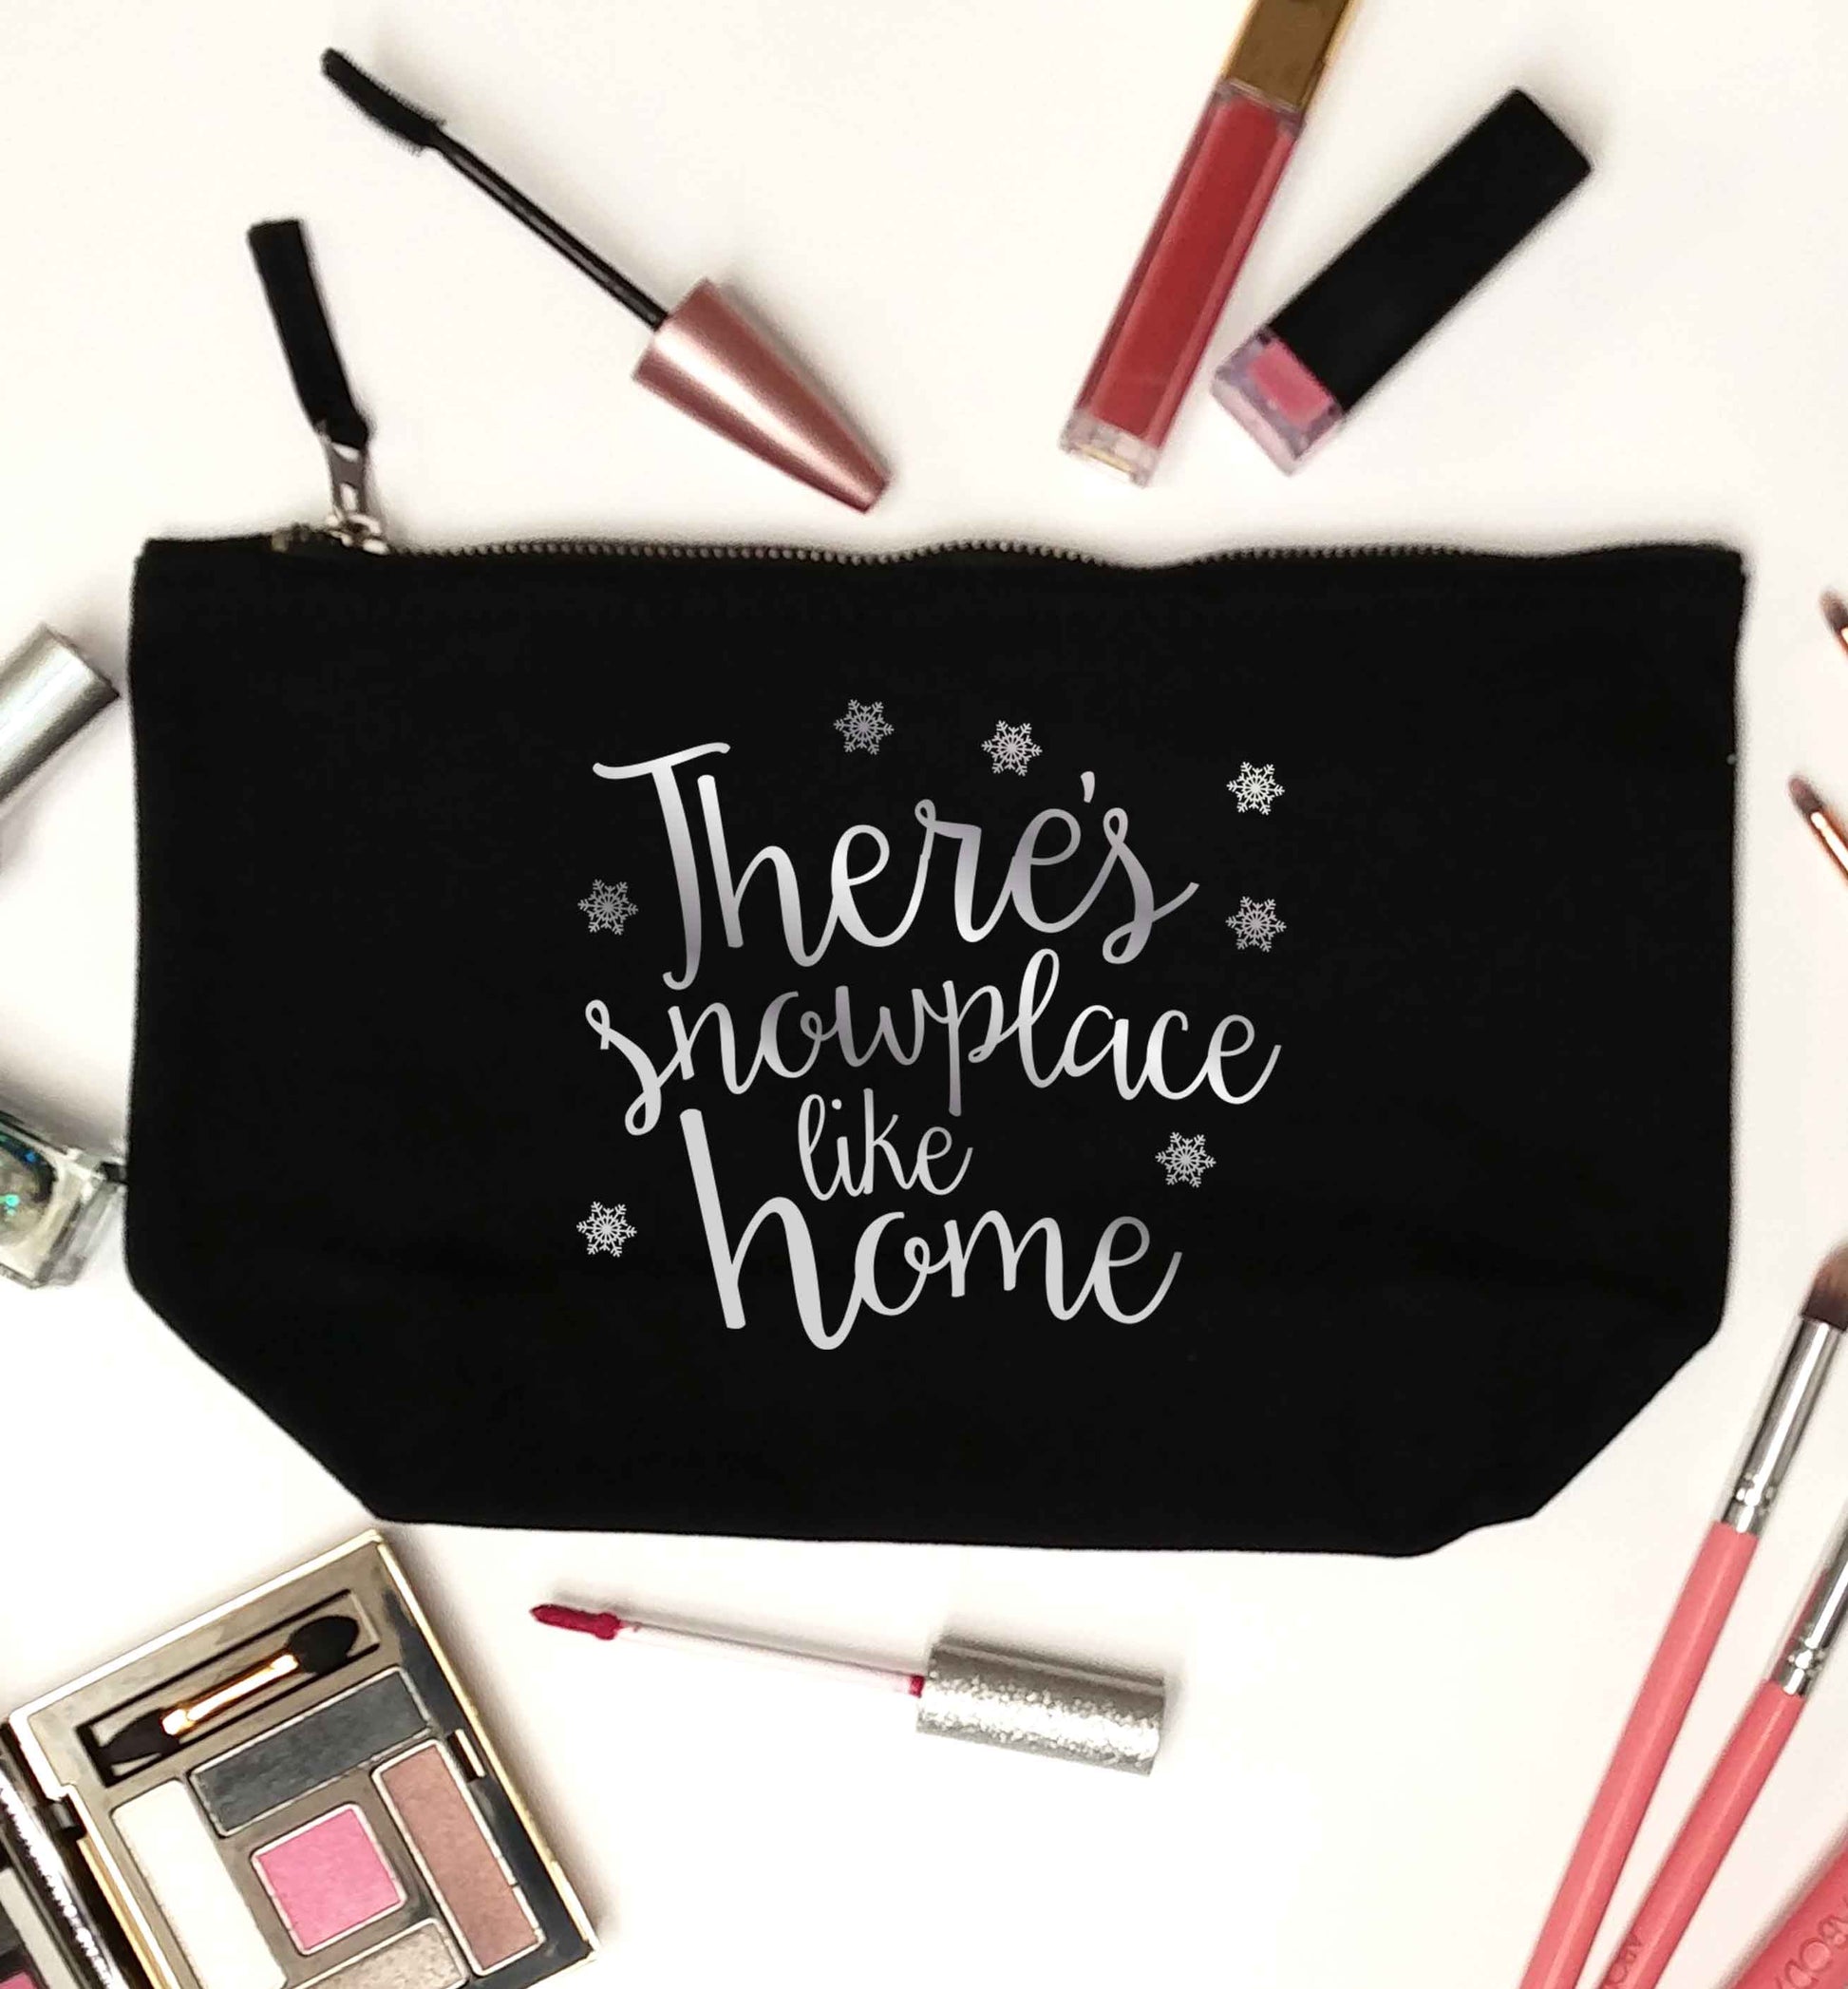 There's snowplace like home - metallic silver black makeup bag